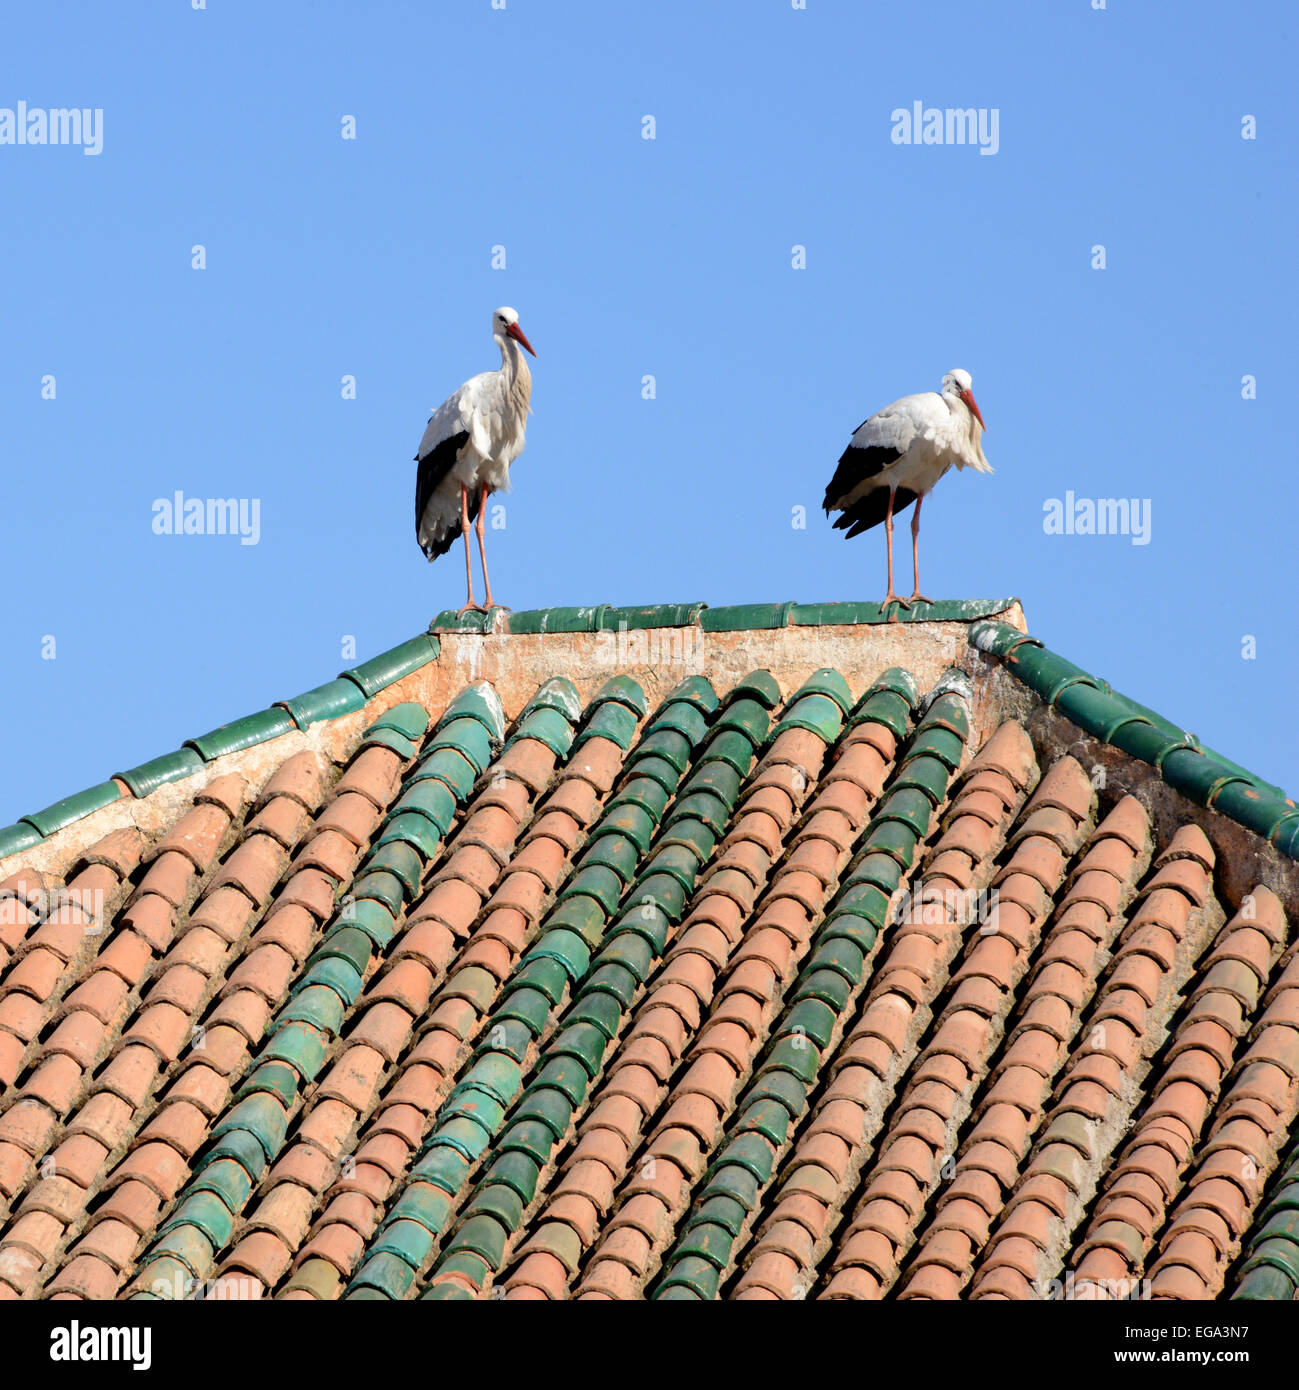 Storks on Marrakech rooftop. Stock Photo